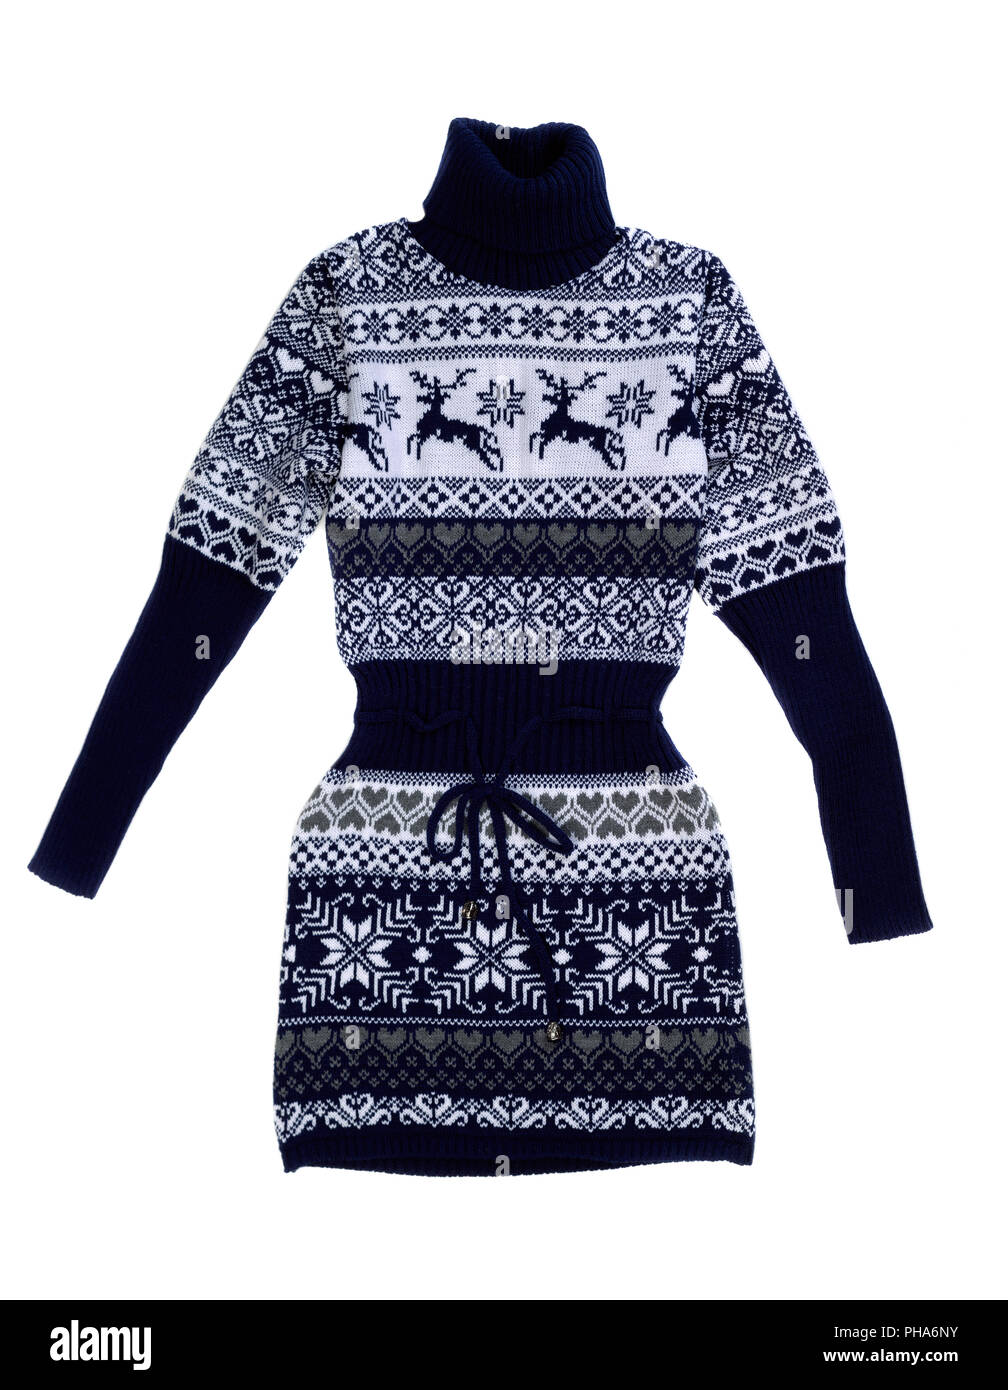 female knit dress with a pattern of deer Stock Photo